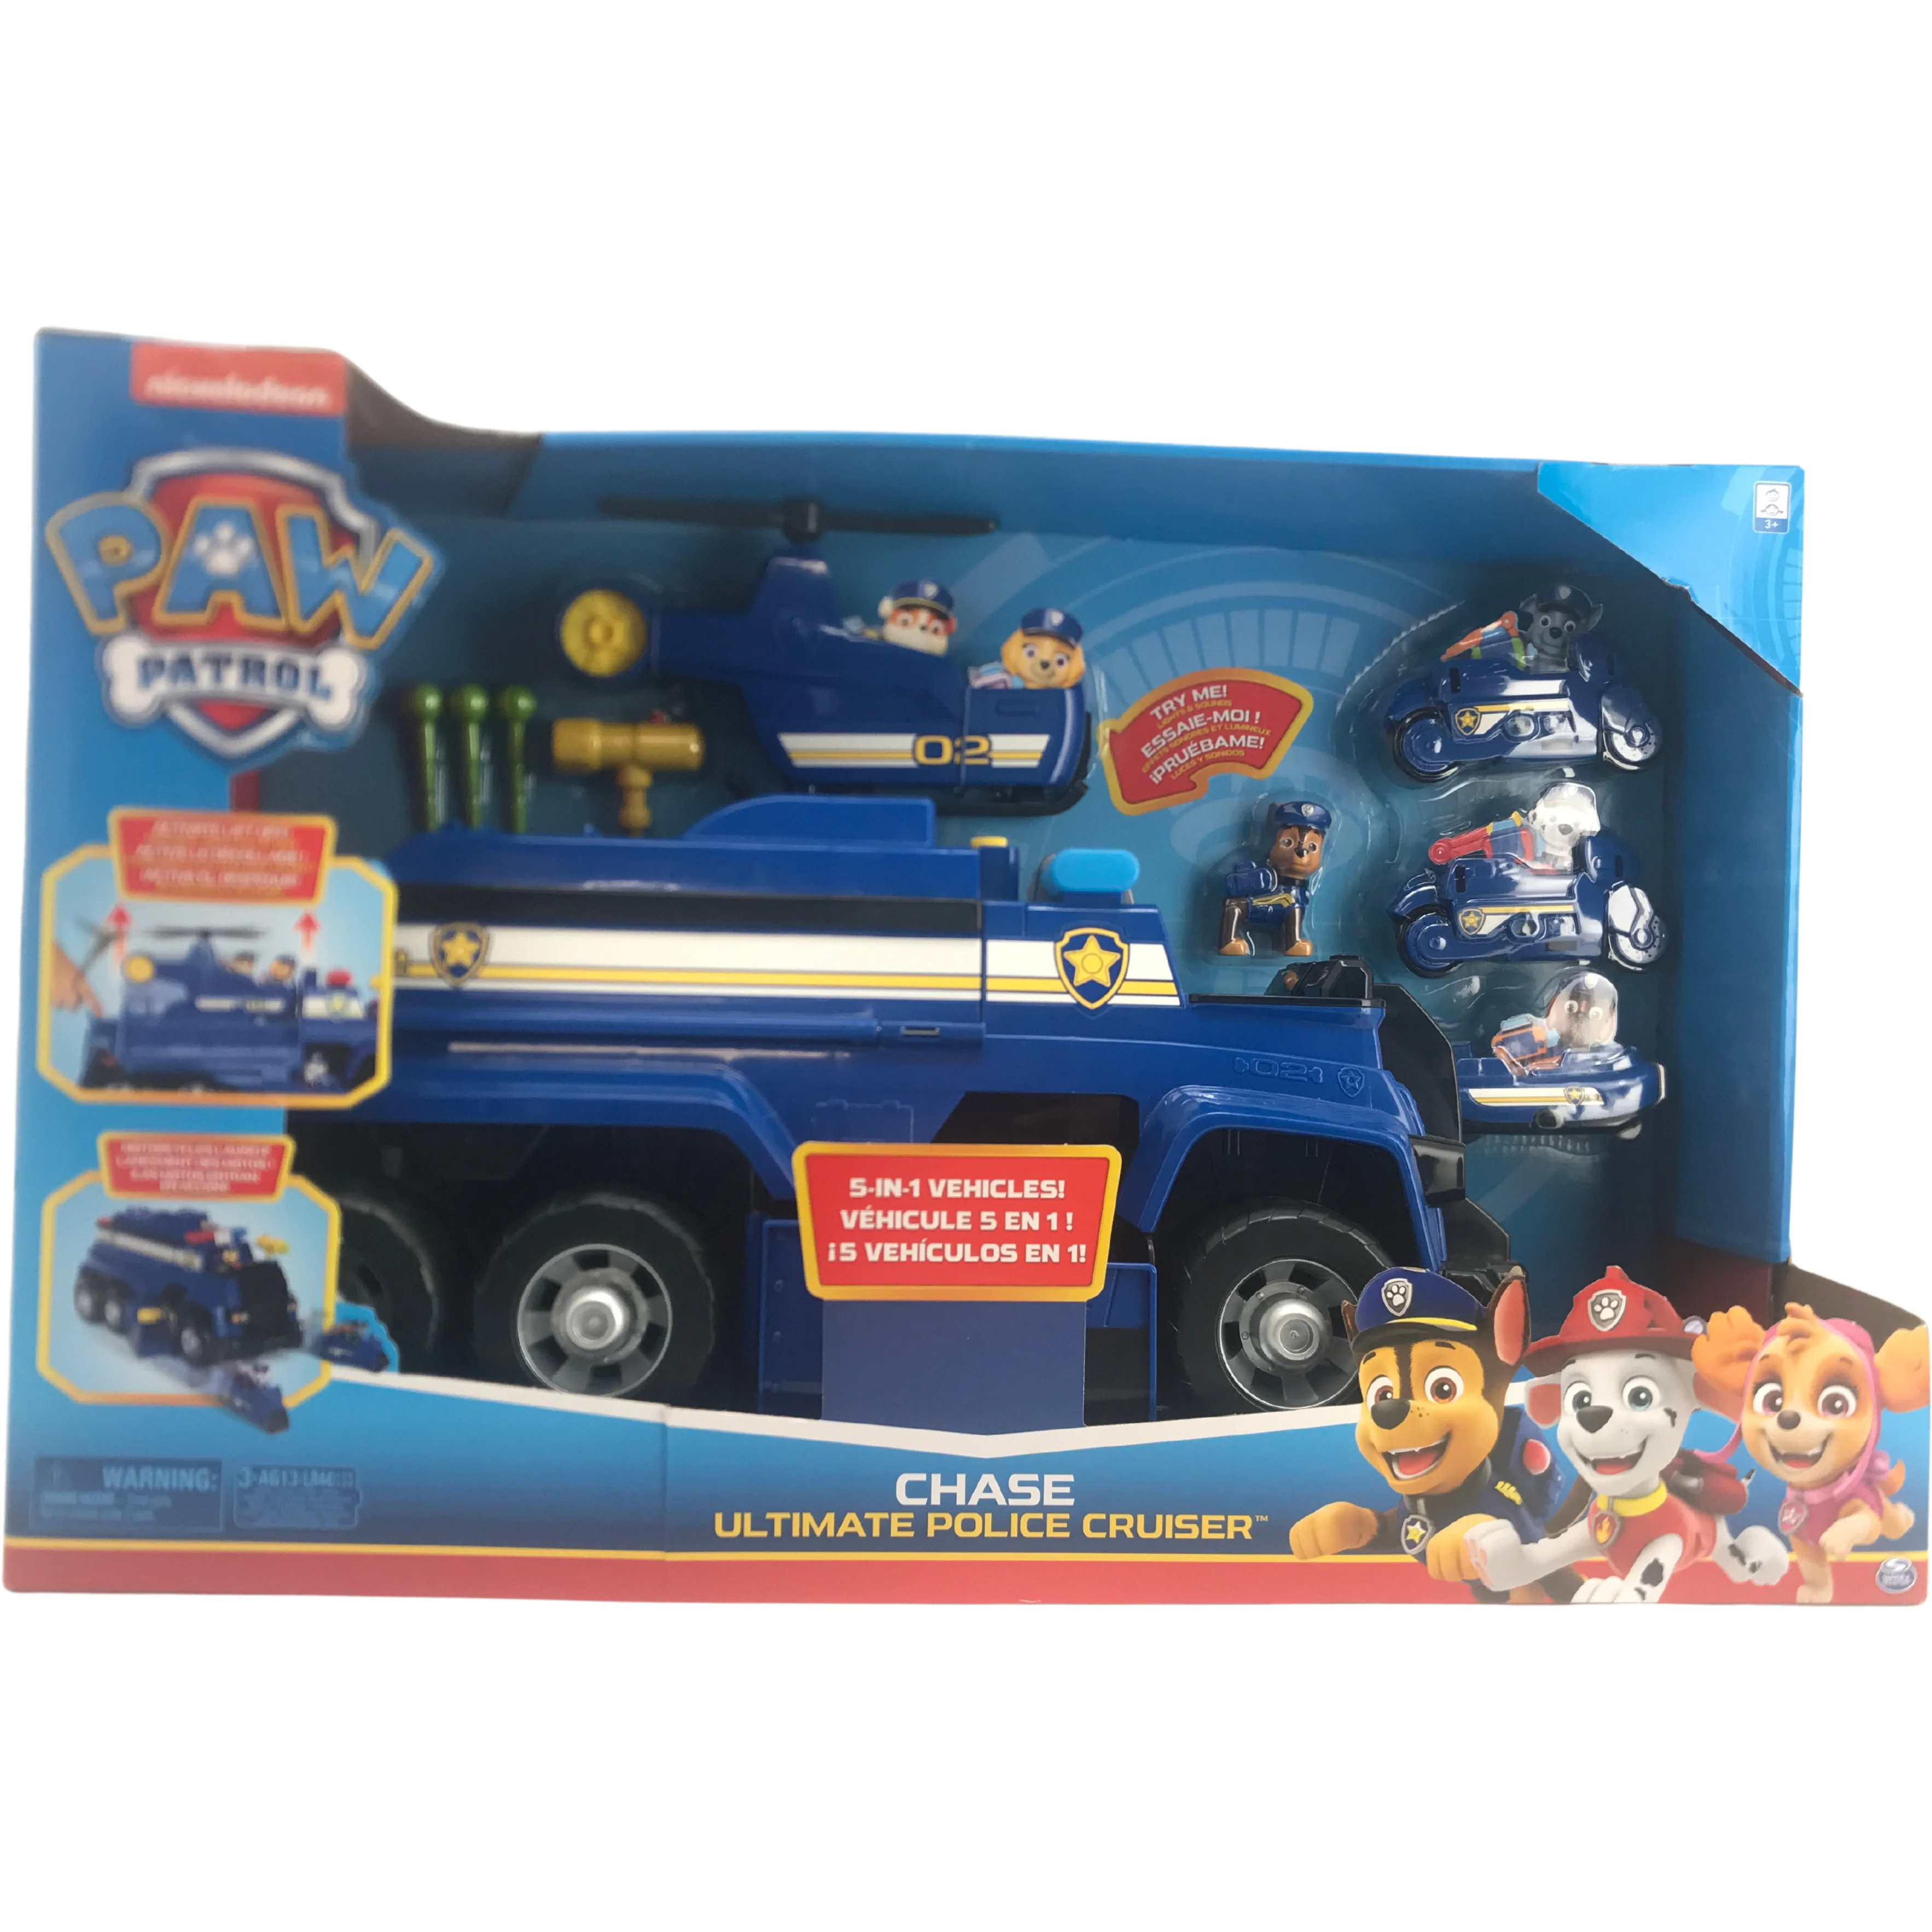 Paw Patrol Chase Ultimate Police Cruiser: 5 in 1 Vehicle / Lights & Sounds